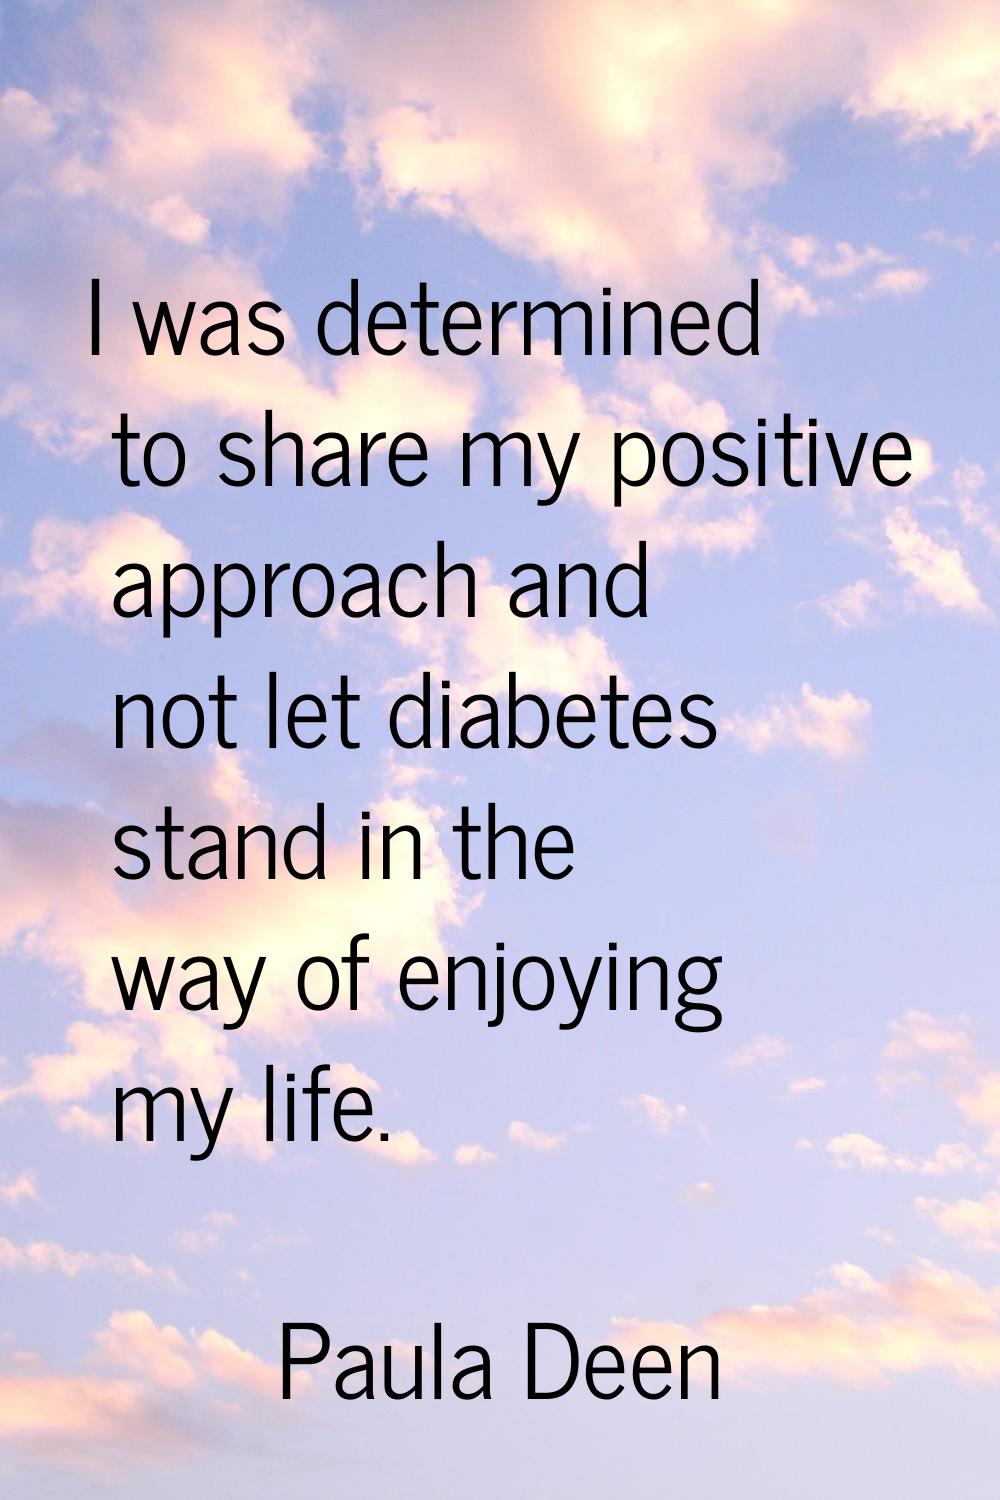 I was determined to share my positive approach and not let diabetes stand in the way of enjoying my